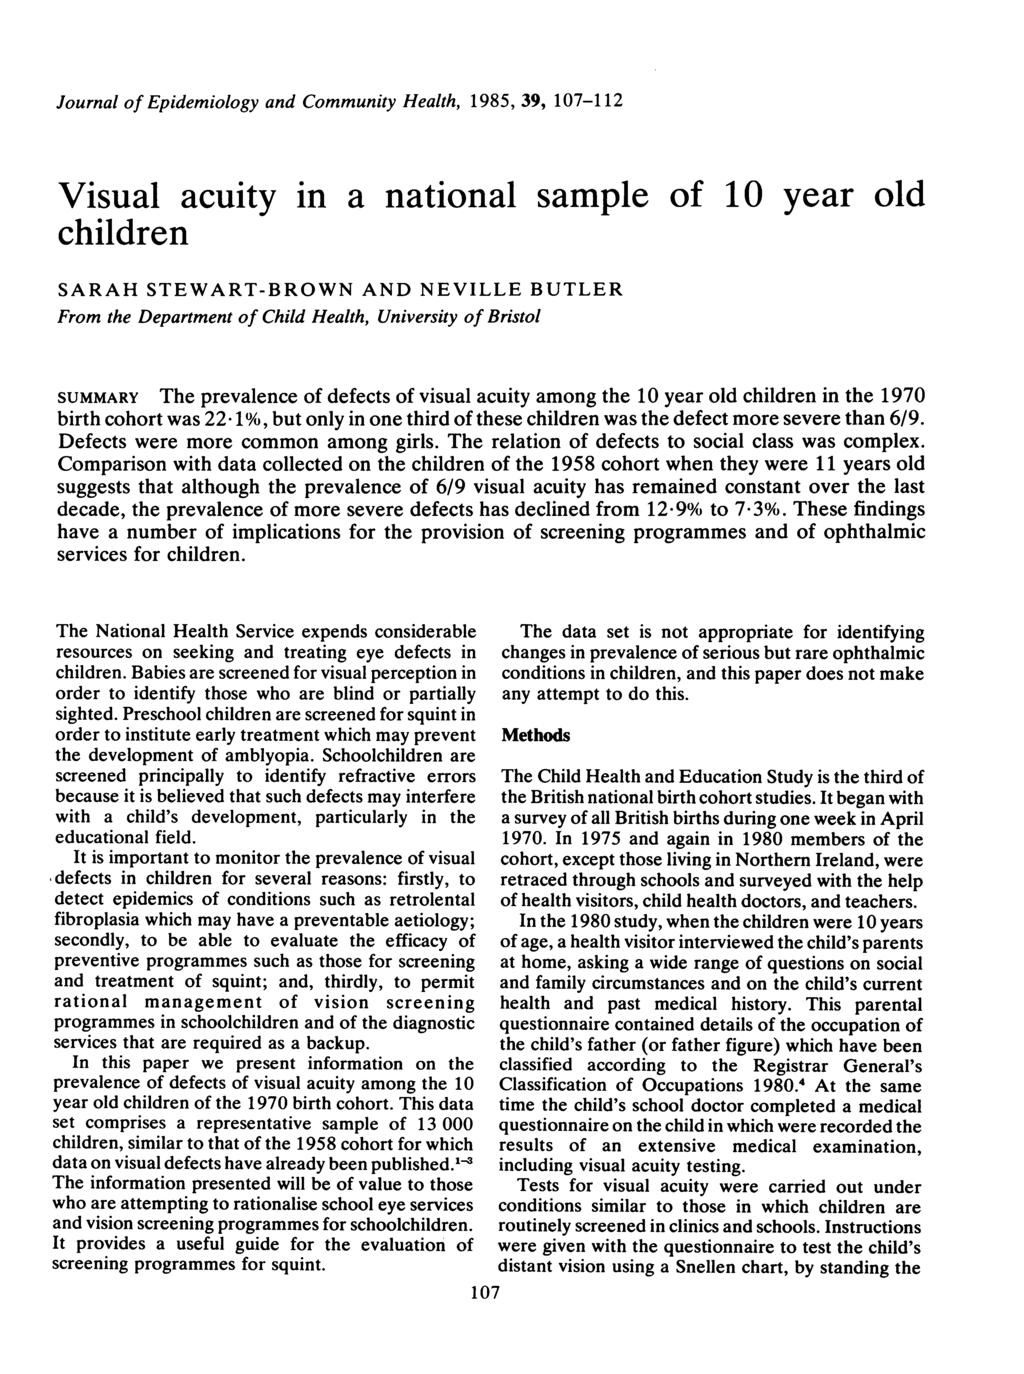 Journal of Epidemiology and Community Health, 1985, 39, 107-112 Visual acuity in a national sample of 10 year old children SARAH STEWART-BROWN AND NEVILLE BUTLER From the Department of Child Health,